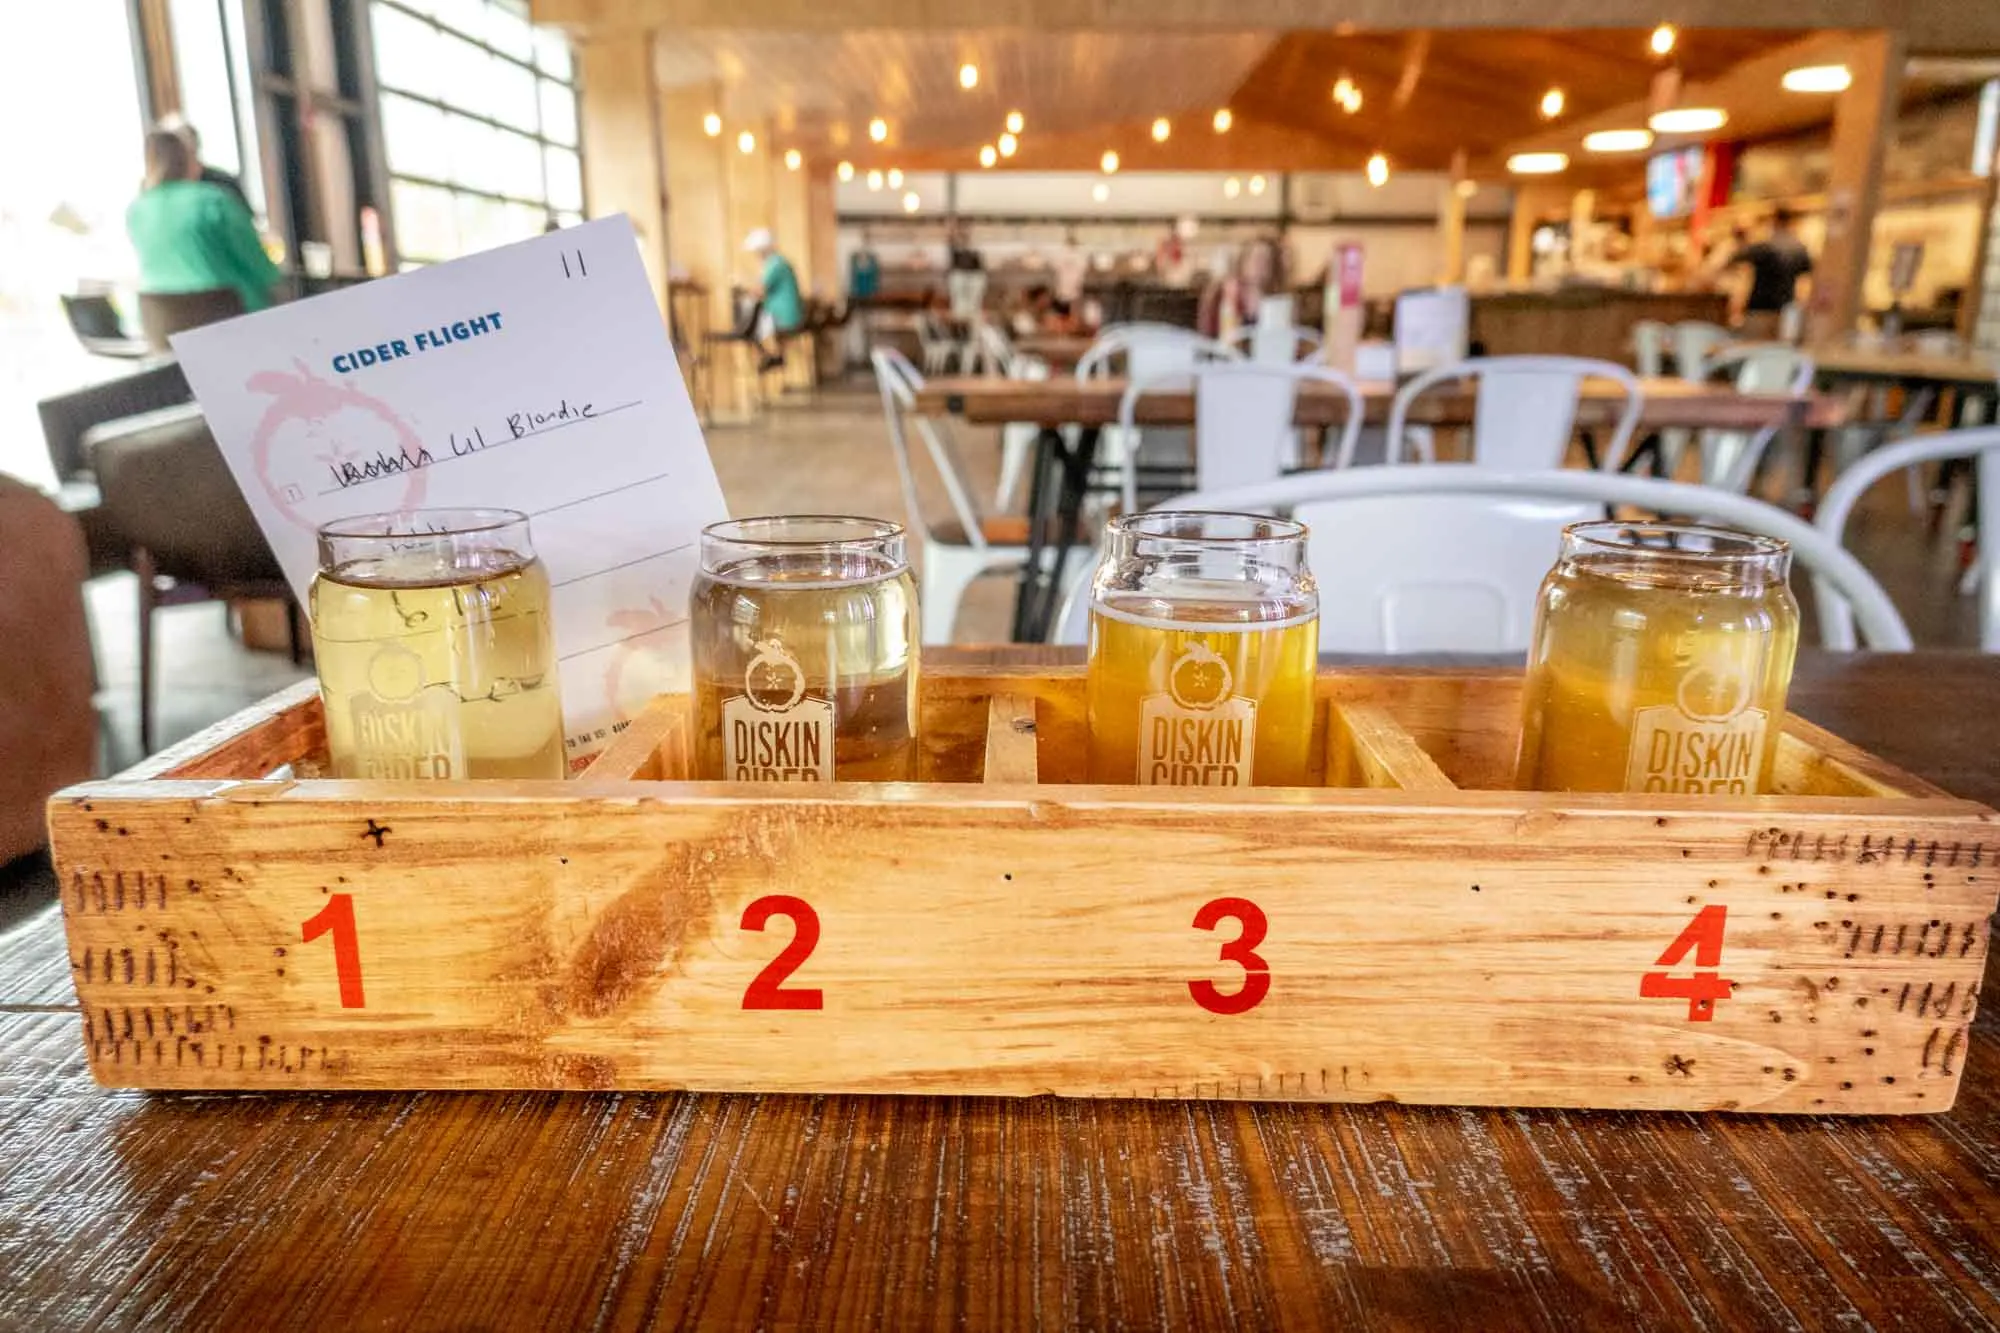 Flight of 4 glasses of hard cider in a wooden carrier on a table.